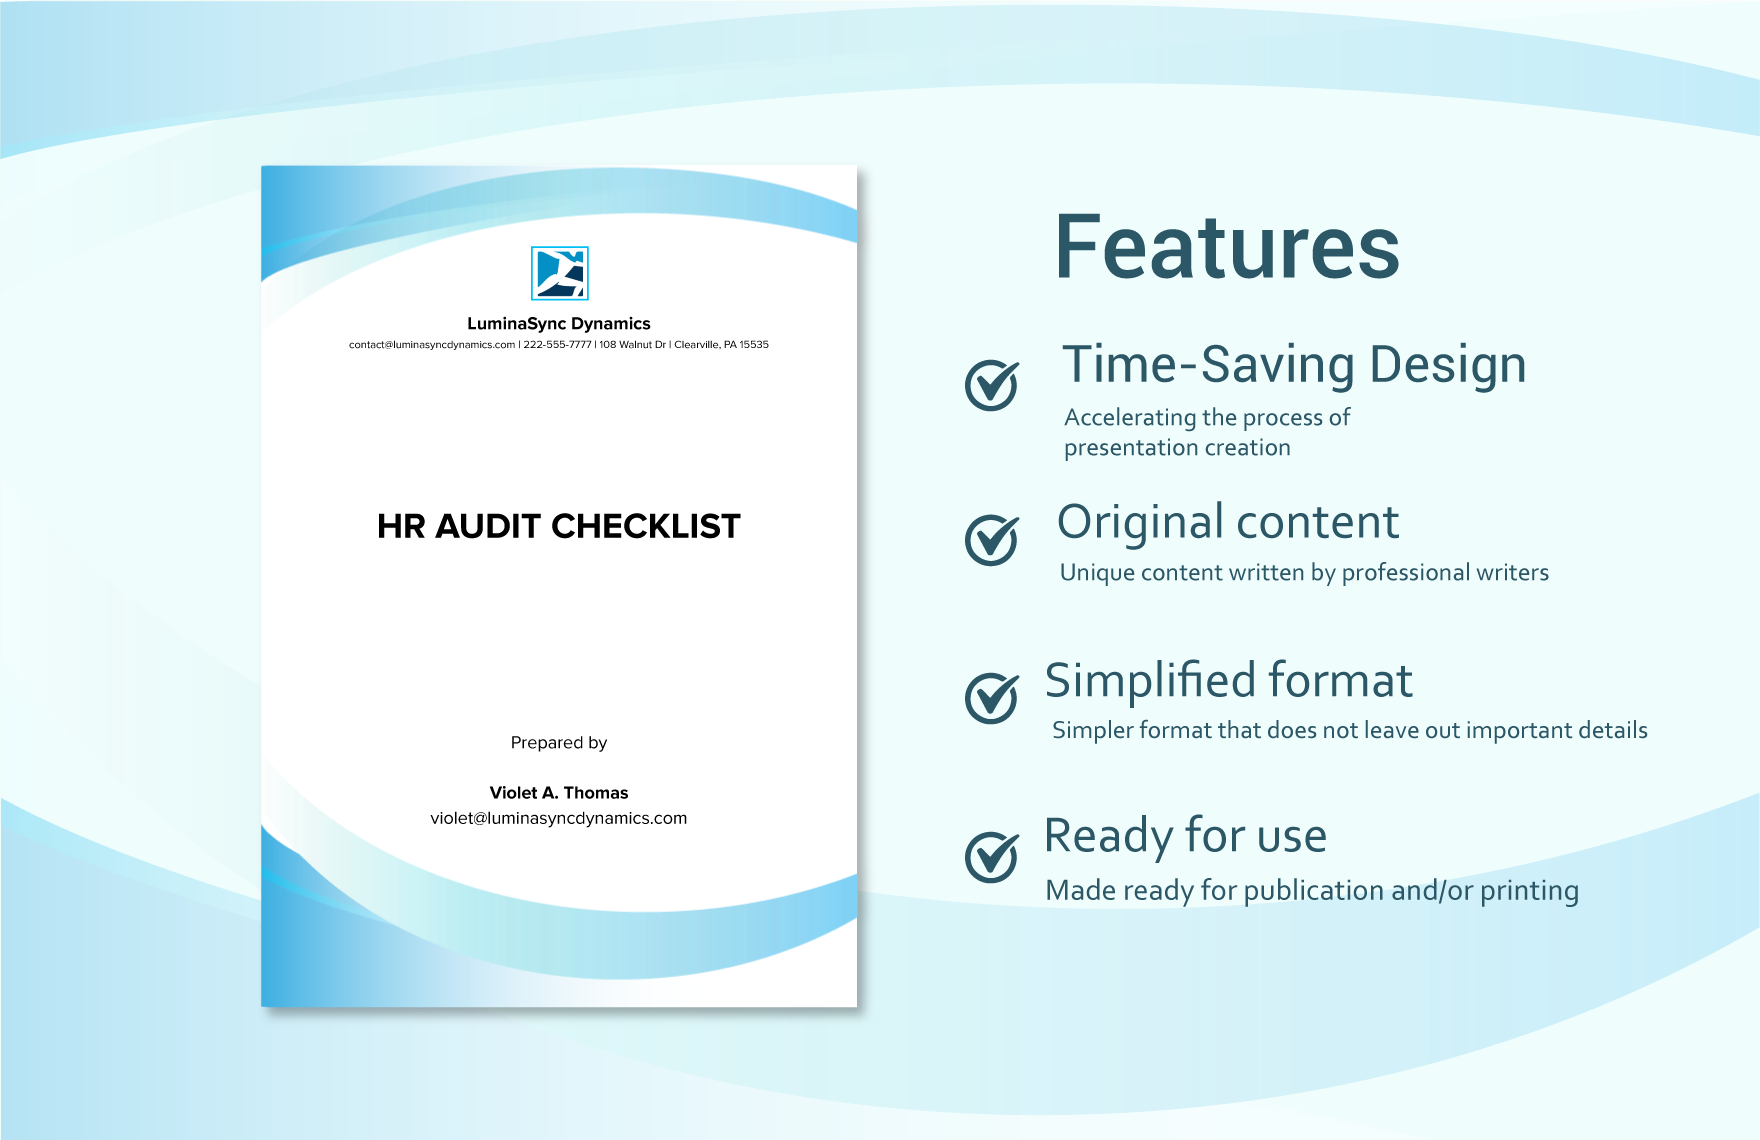 HR Audit Checklist Example Template